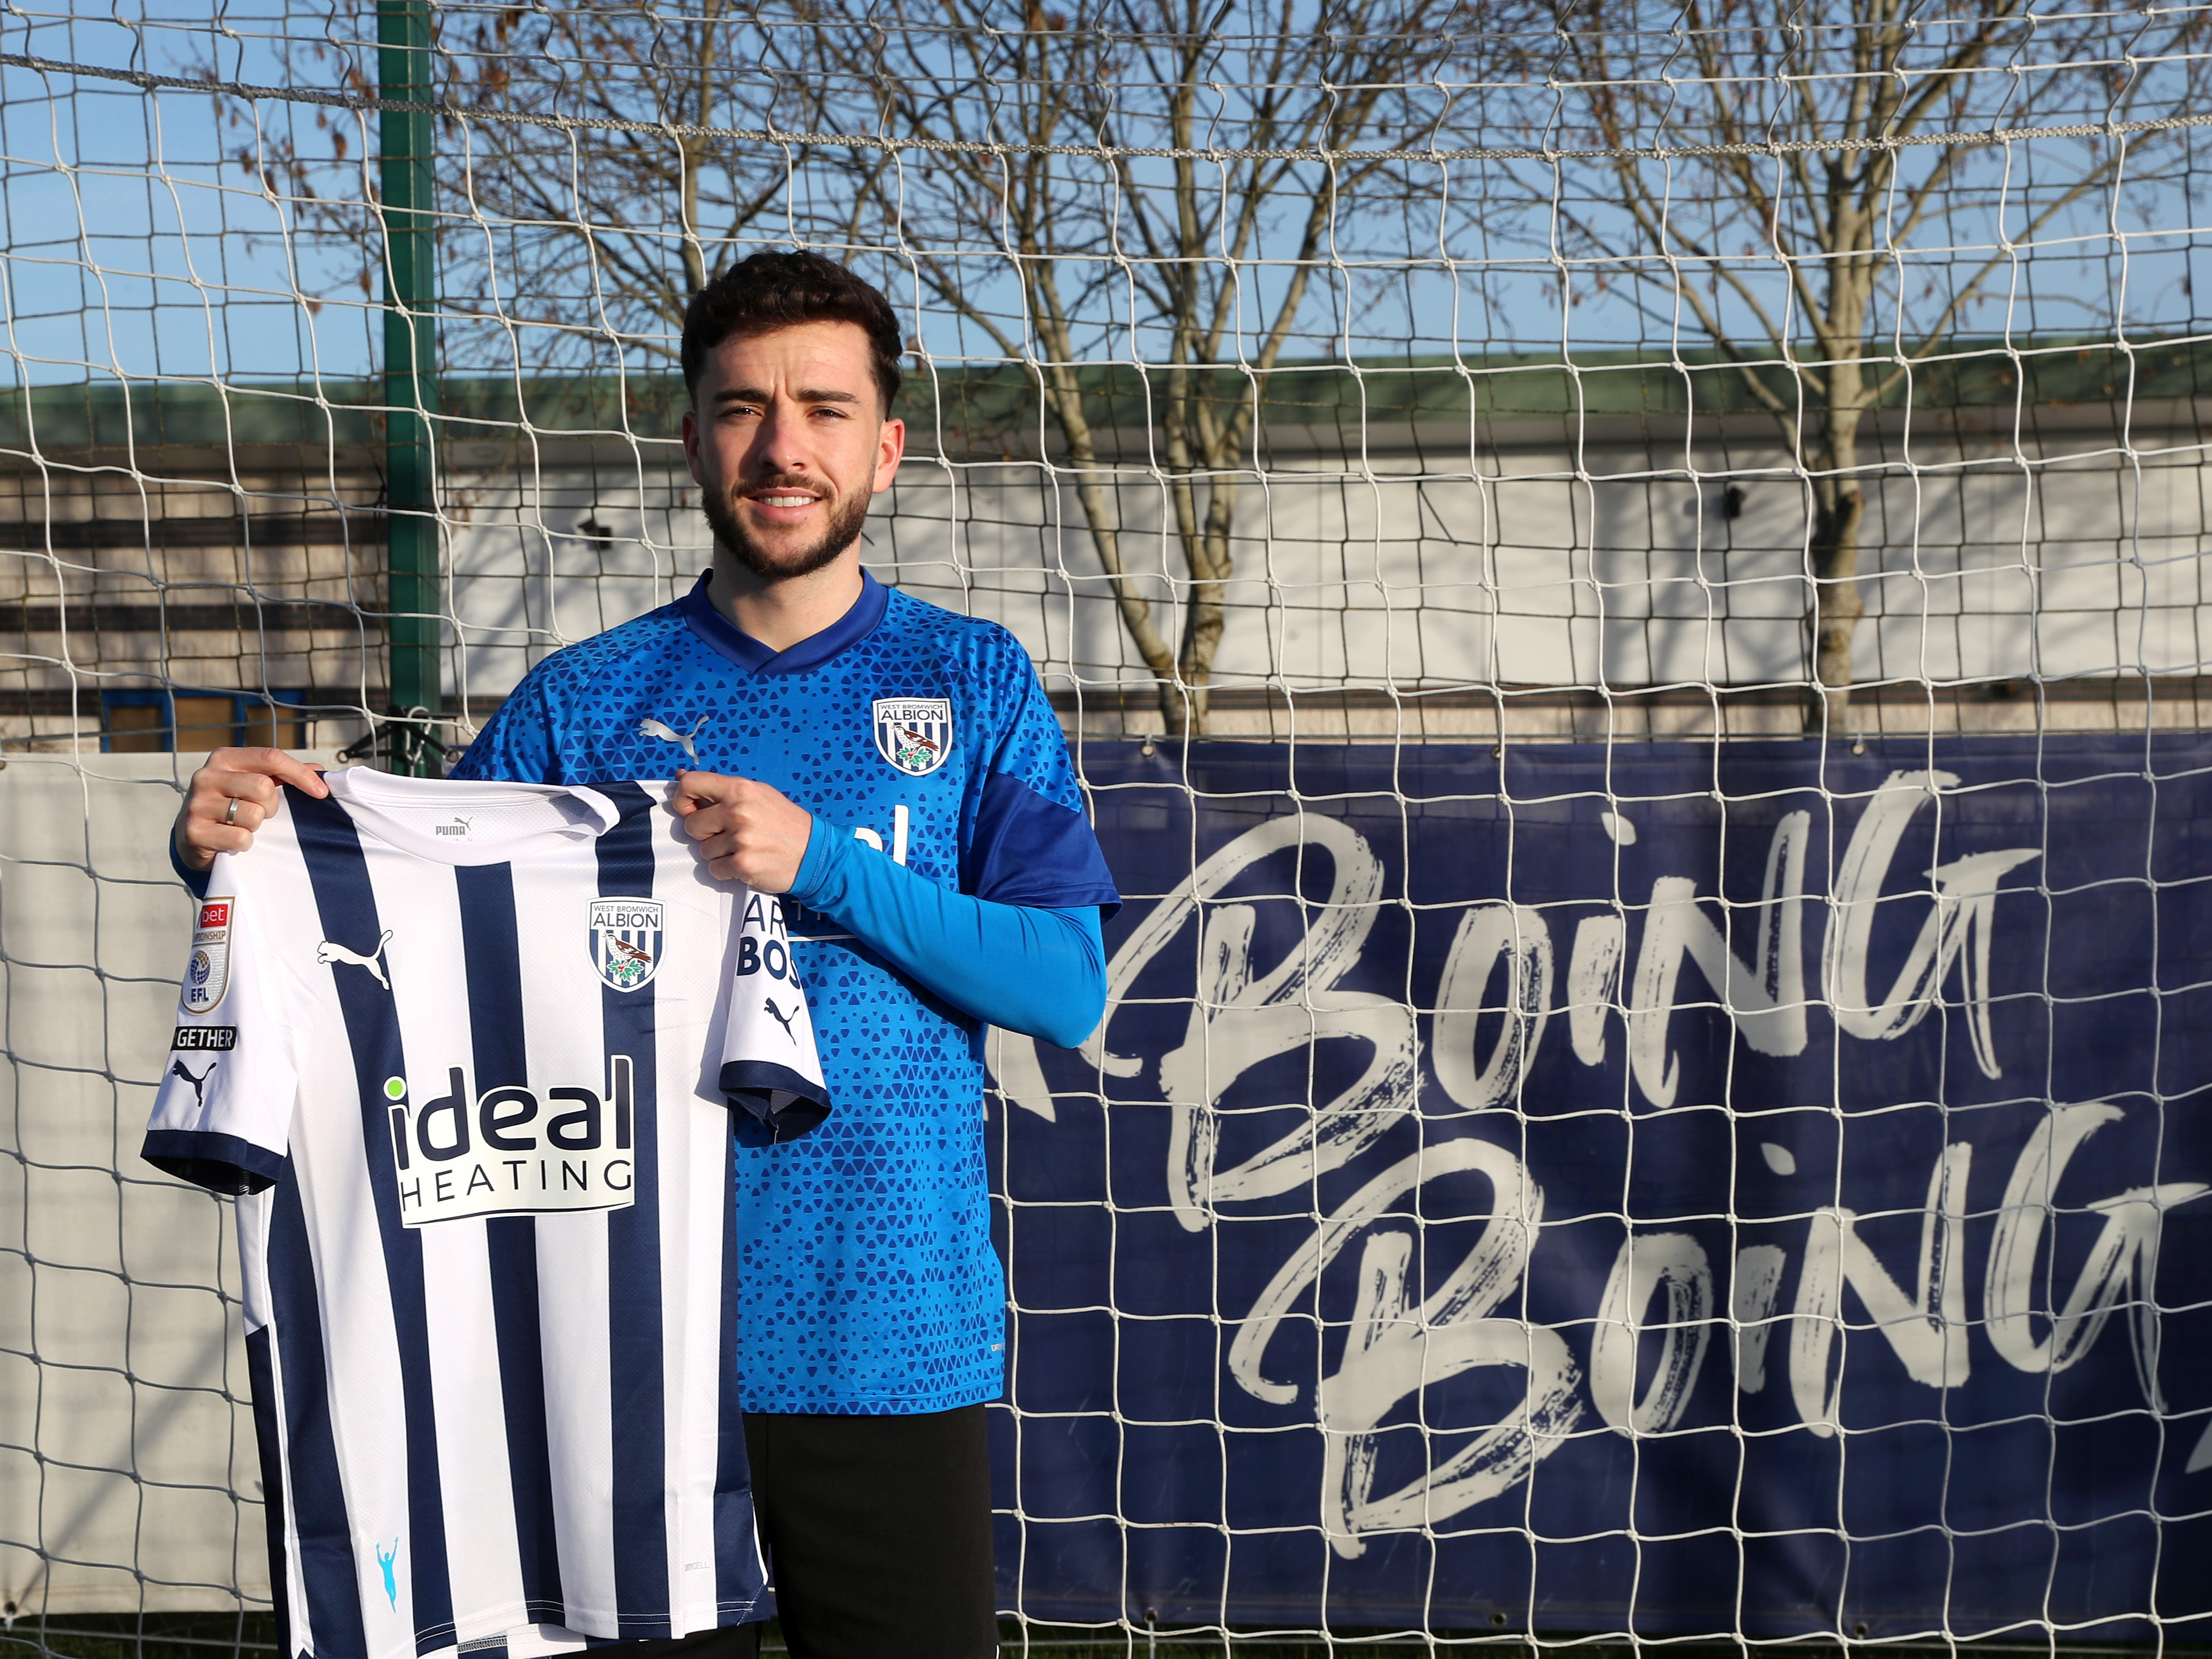 Mikey Johnstone posing for a photo in front of a 'Boing Boing' banner while holding up a home shirt